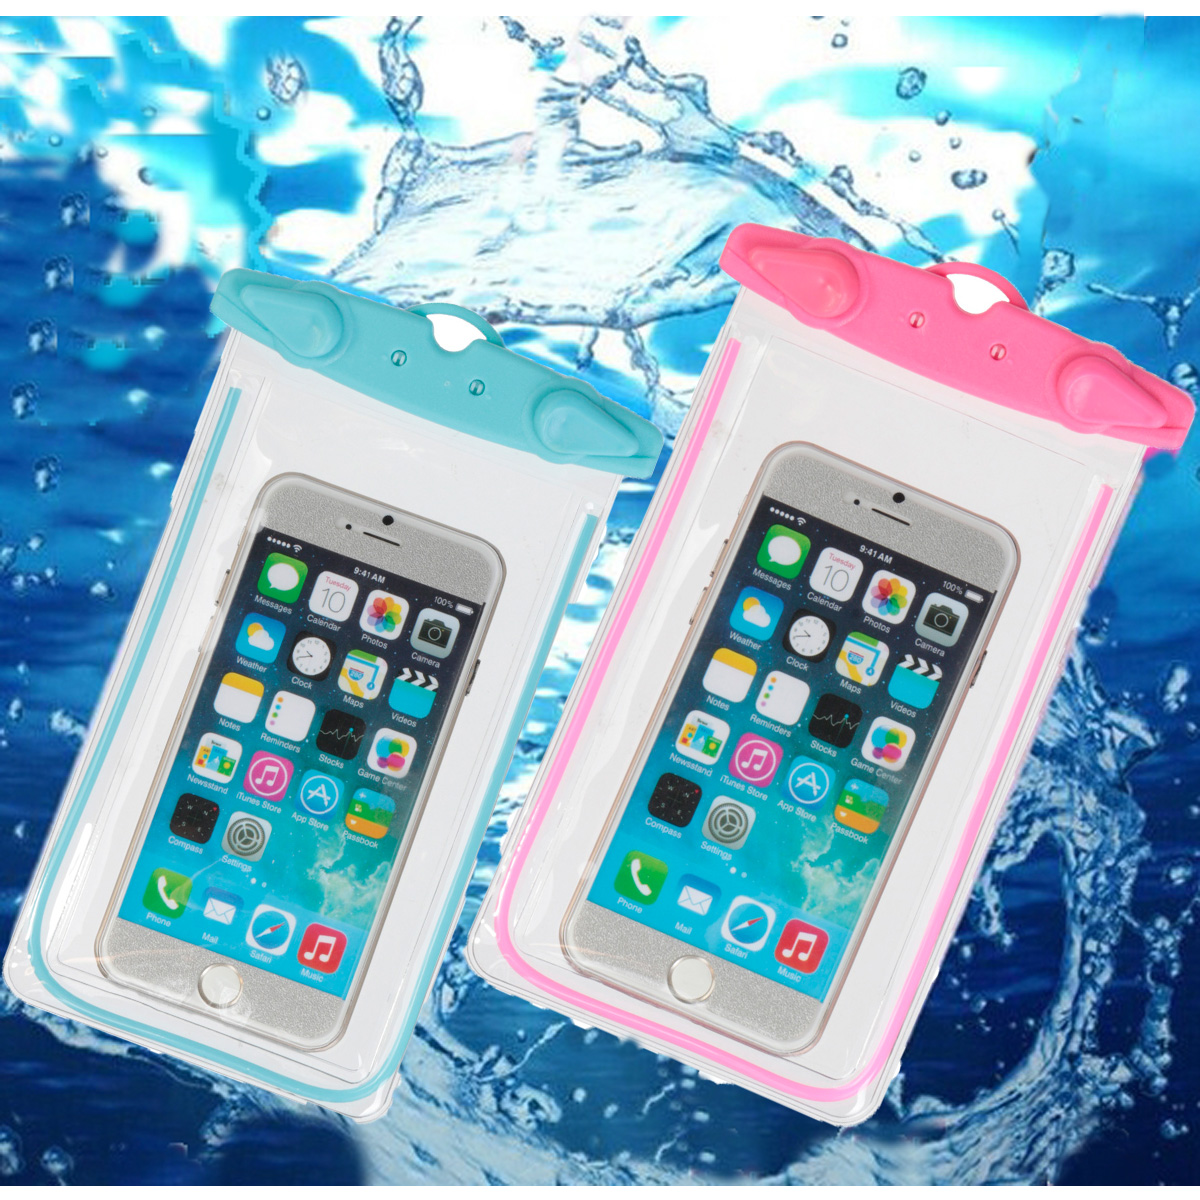 Universal-Waterproof-Fluorescent-Under-Water-Pouch-Case-Cover-For-Mobile-Phones-1003177-1